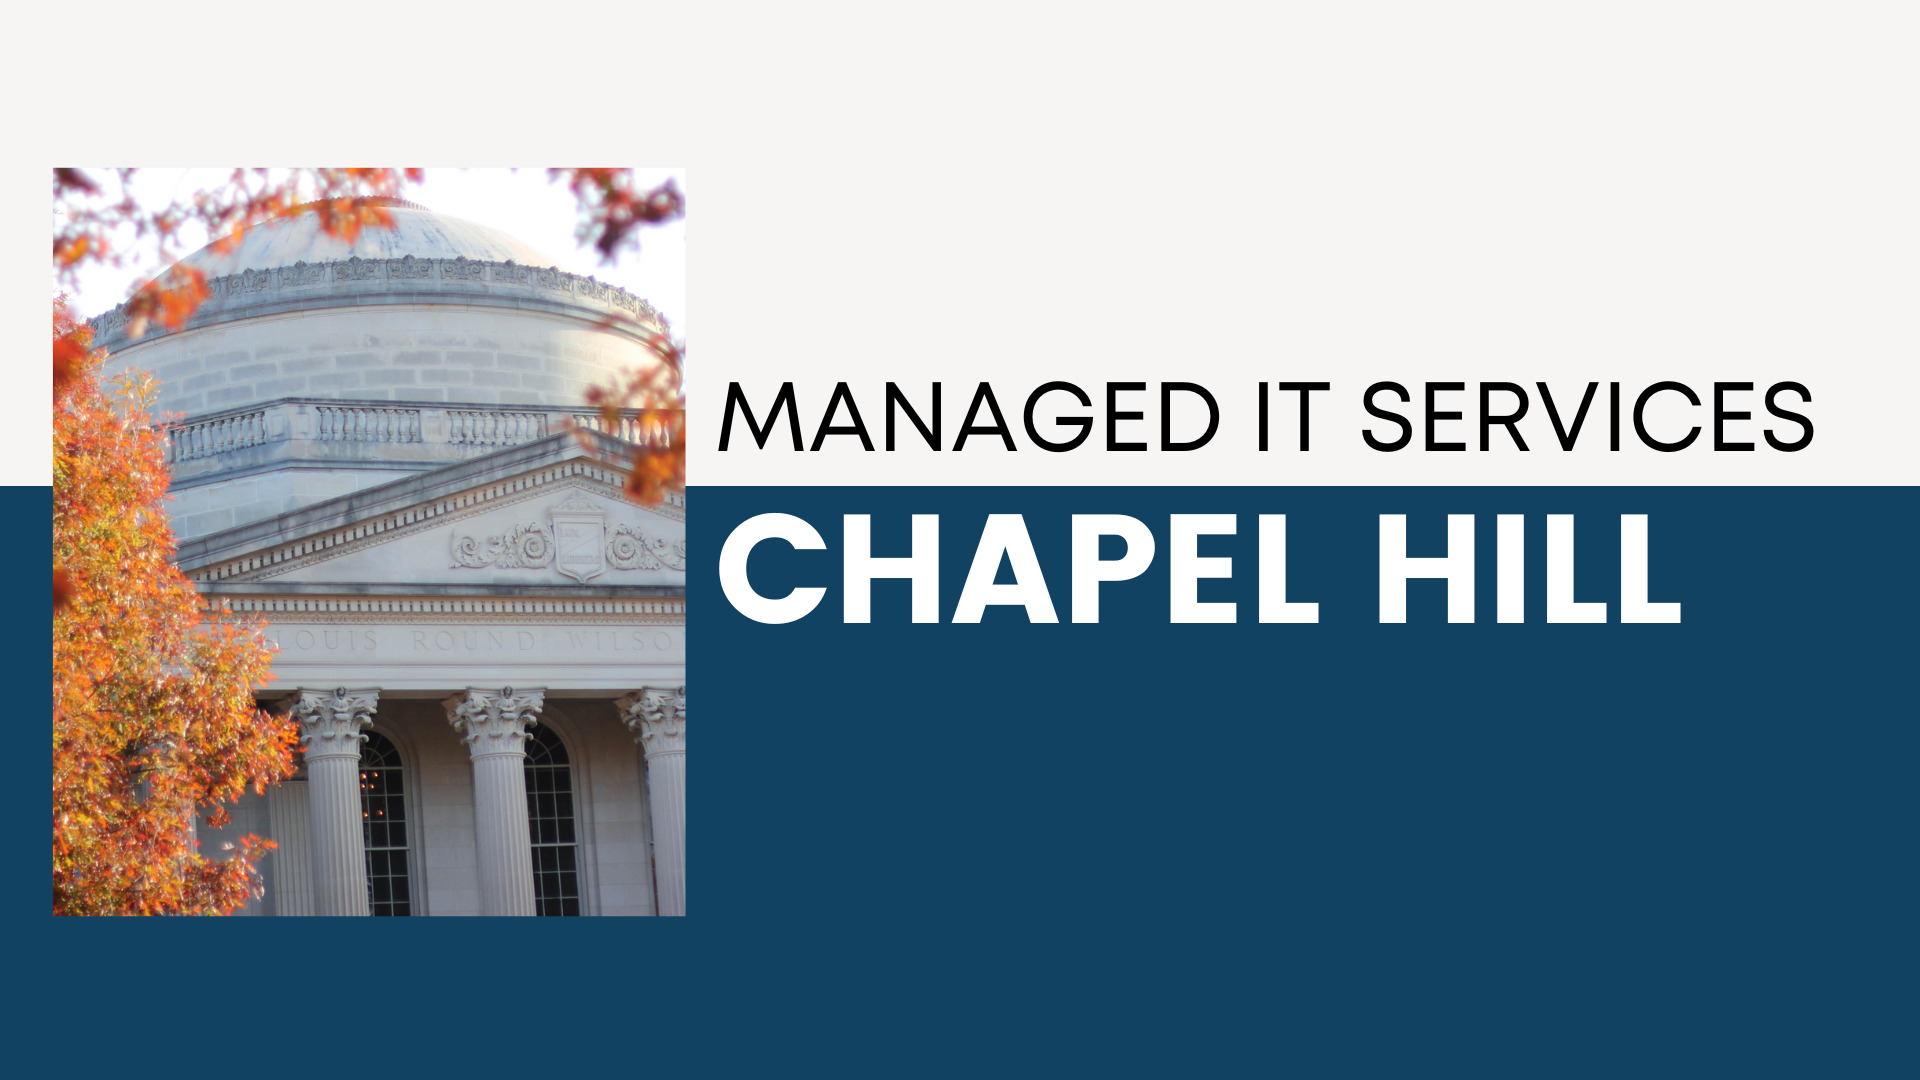 Managed IT Services in Chapel Hill, NC